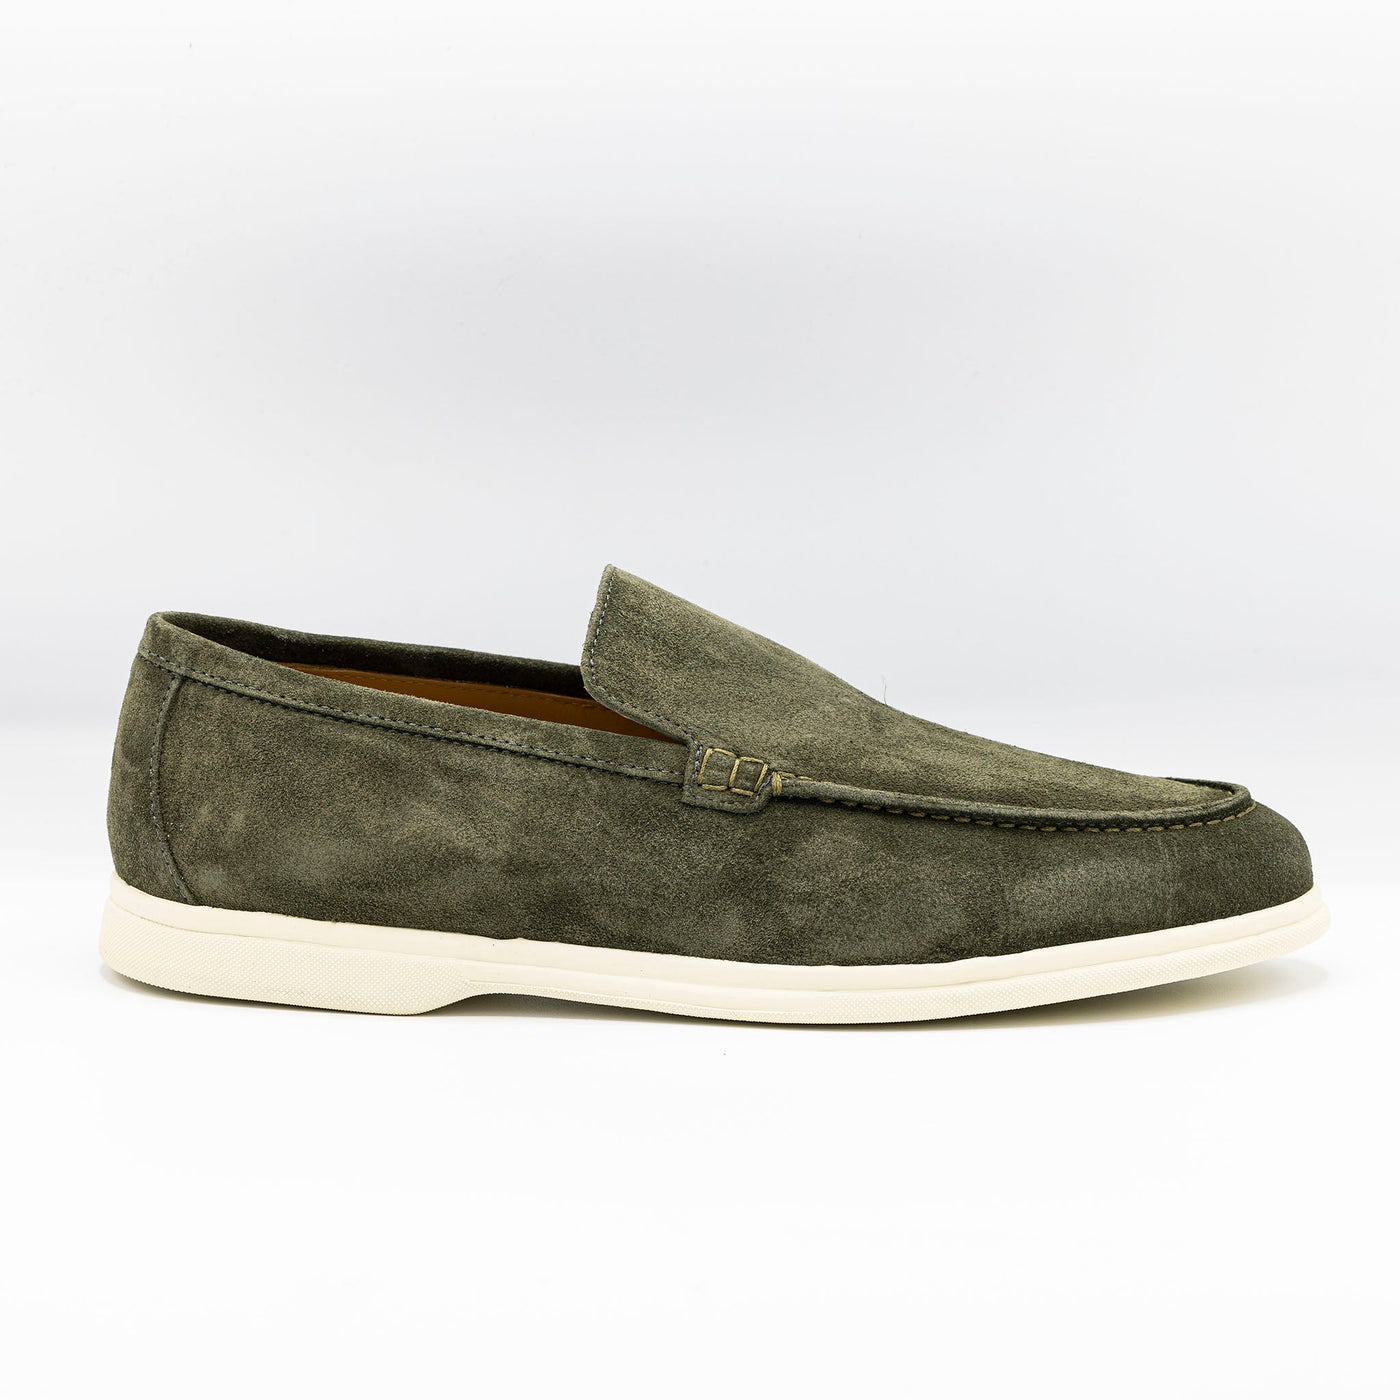 City loafer, Summer walk in khaki suede set on a white rubber sole. 